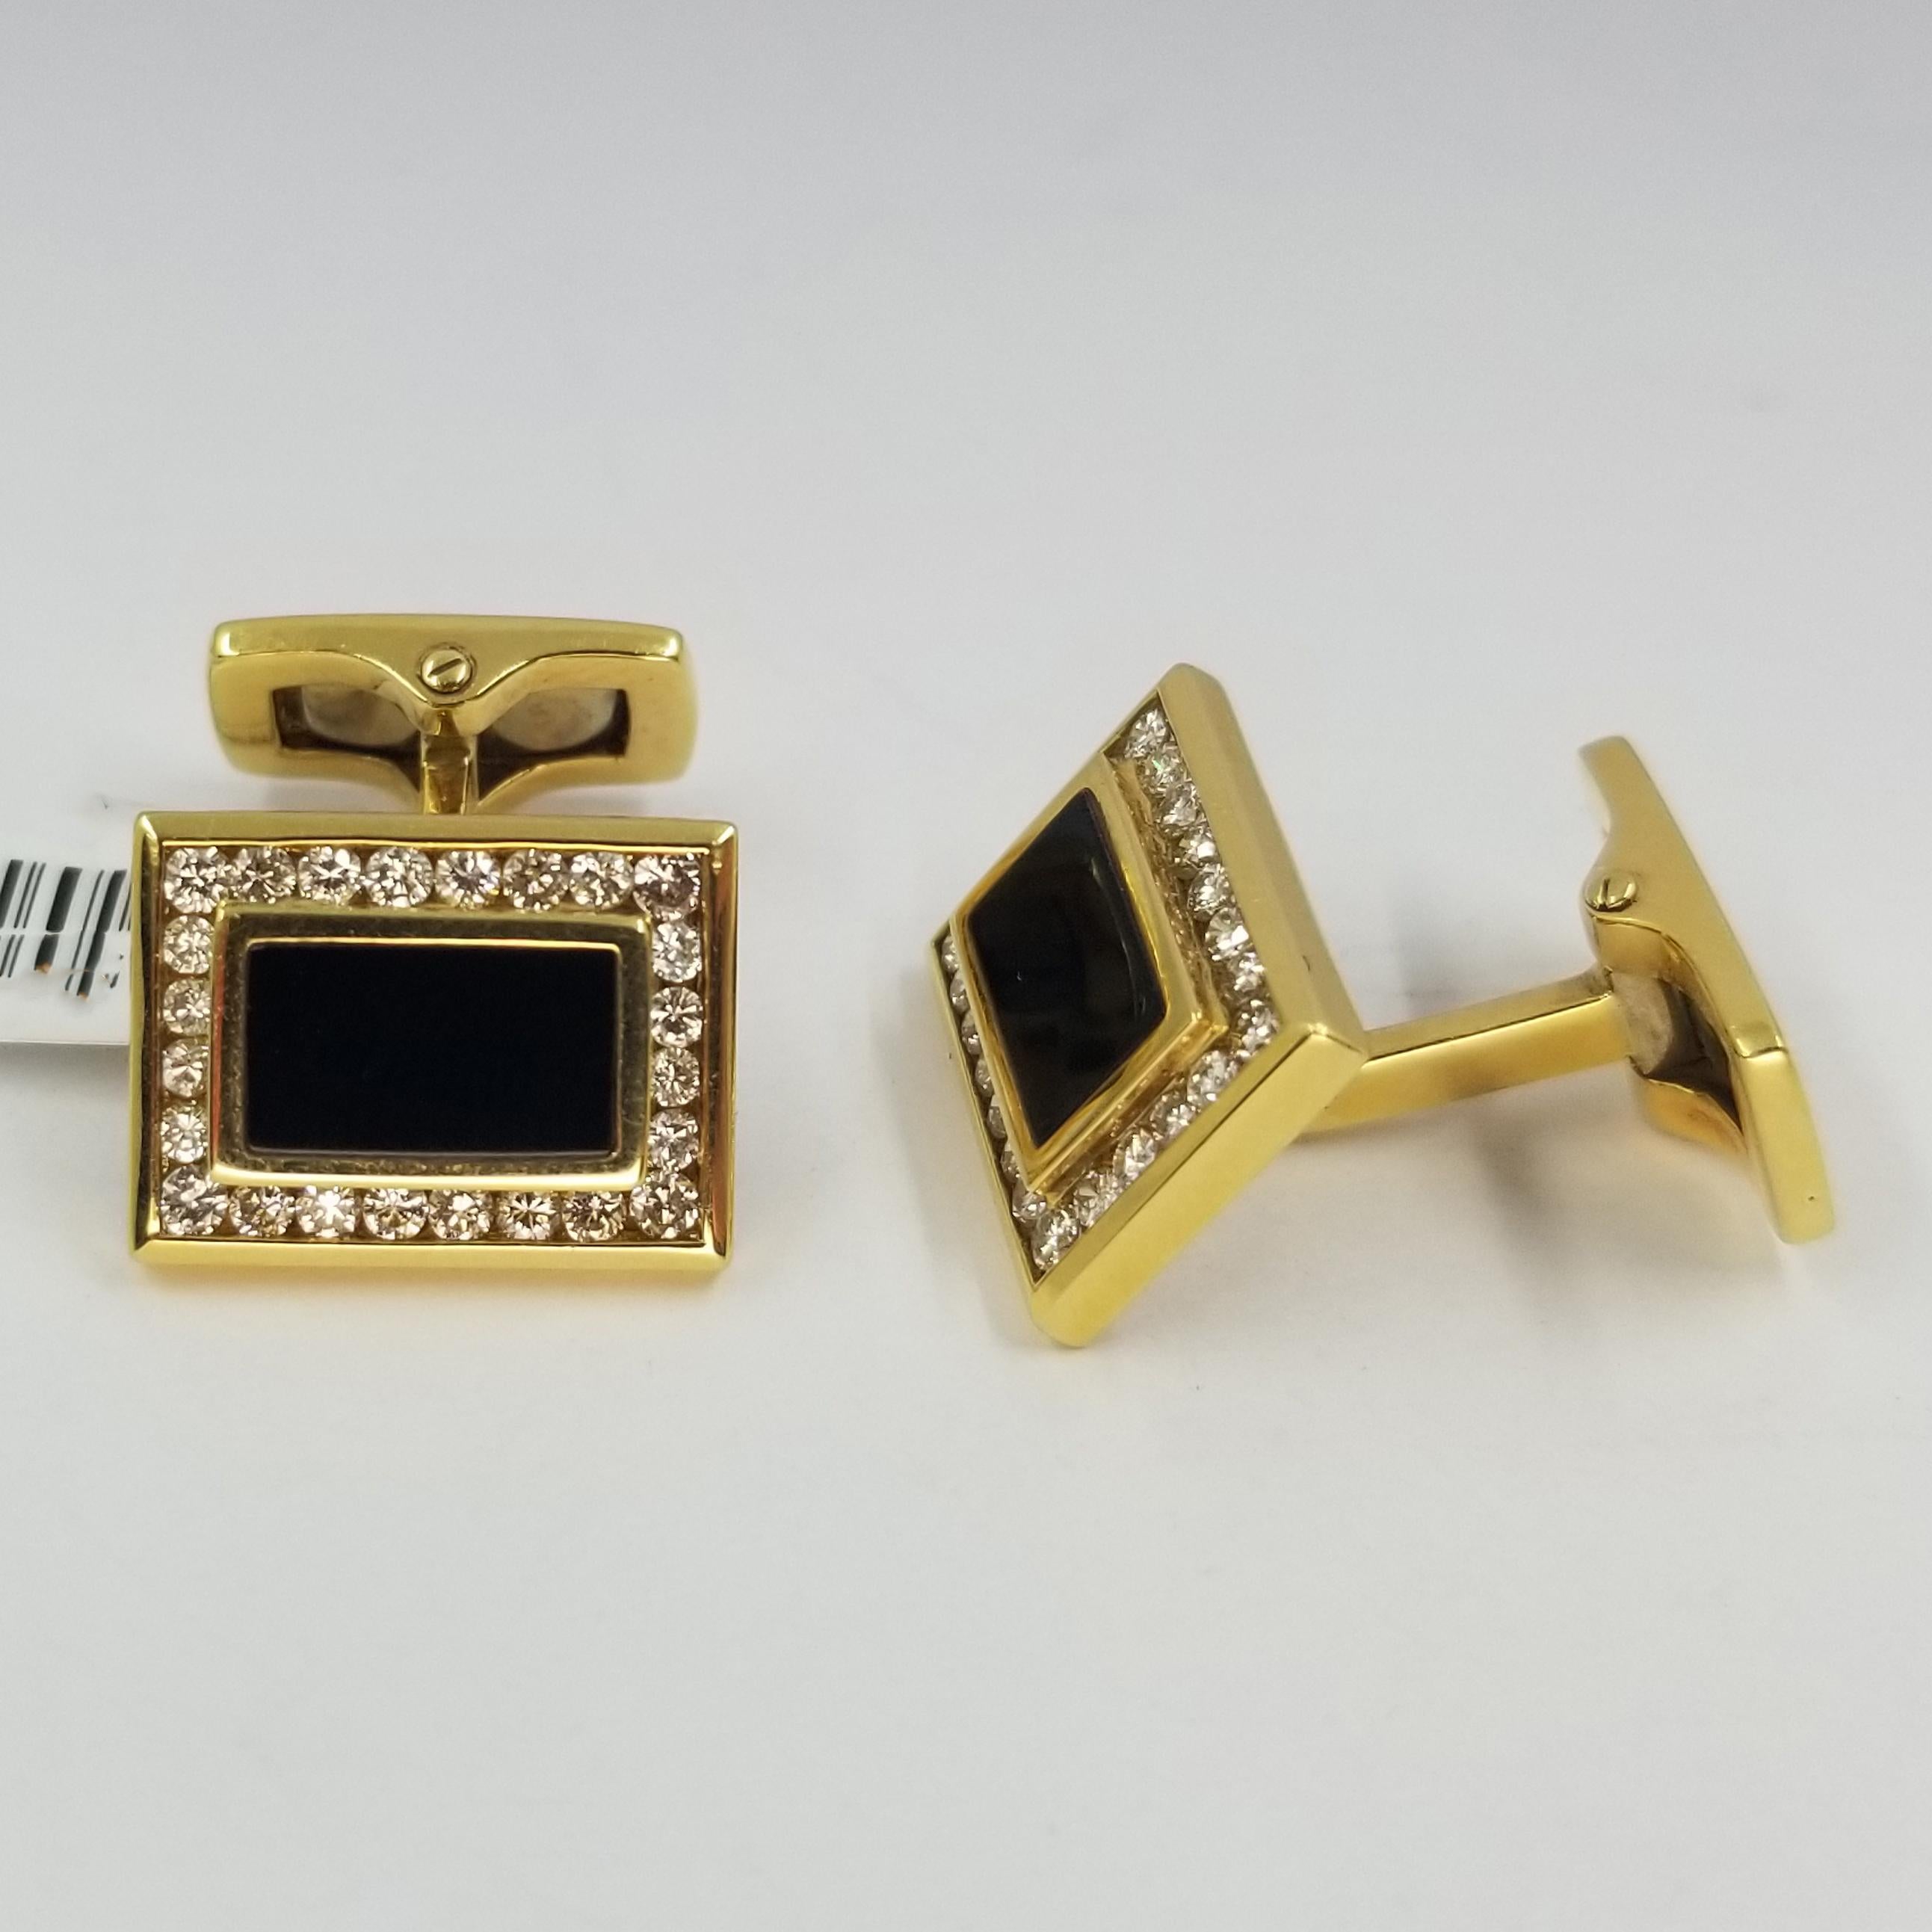 Set of 2 cufflinks crafted in 18 karat yellow gold (stamped 750), onyx, and channel set diamonds. 48 round diamonds of VS clarity & G color total approximately 1.00cttw. Hinged backs for easy dressing and removal.